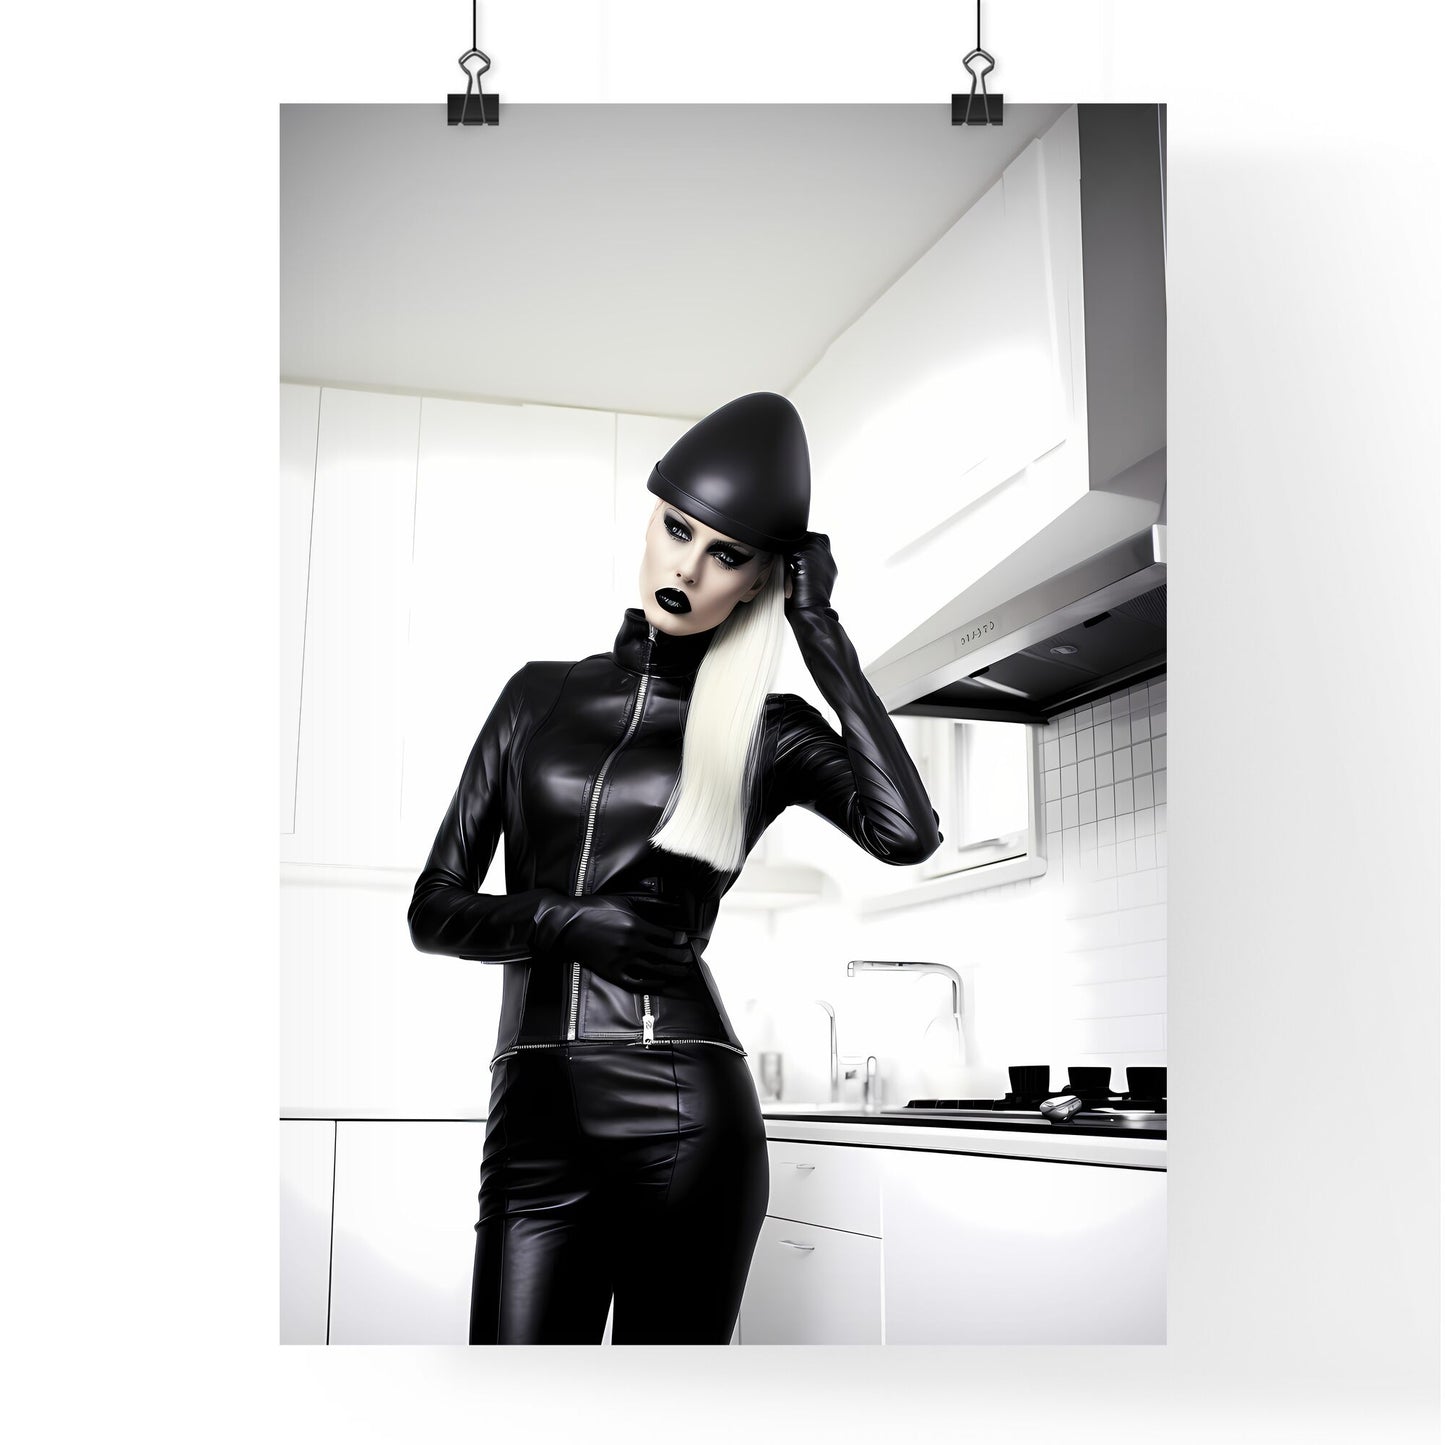 A Poster of female black skintight leather pants hips - A Person Wearing  Black Leather Pants And High Heels by HEBSTREIT